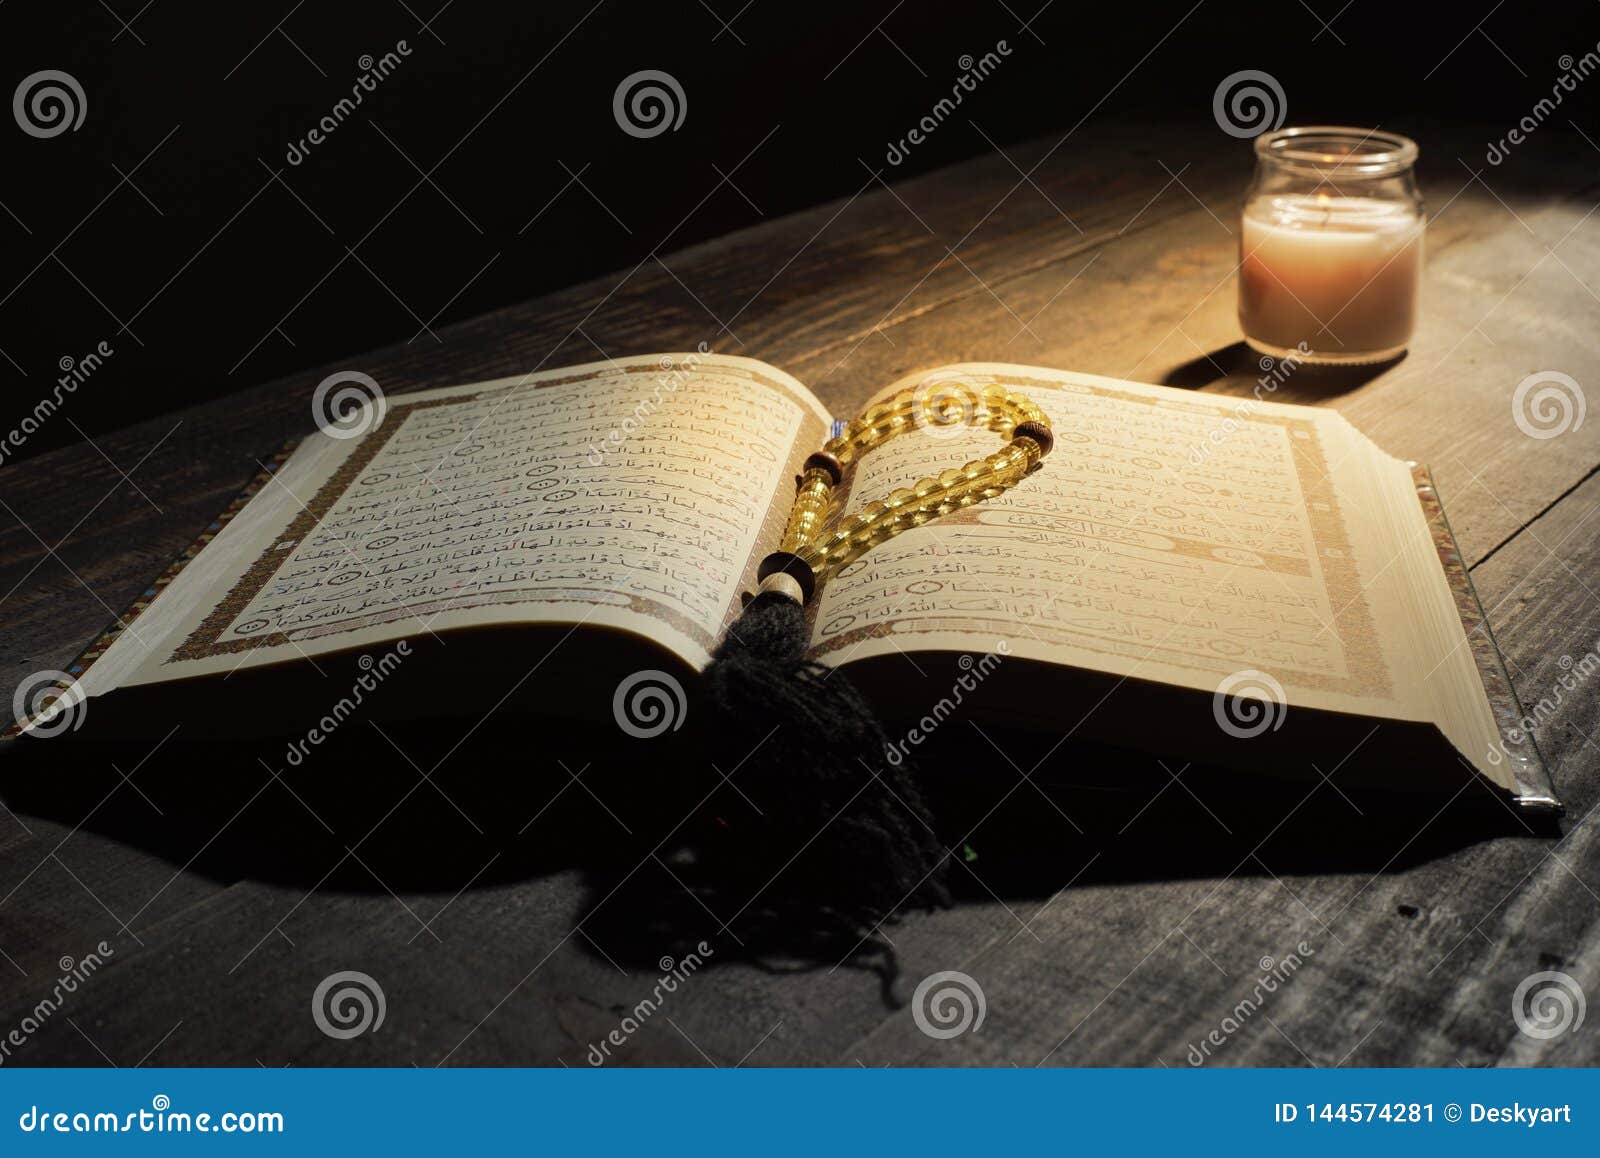 the qur`an, the holy book of islam. worship month of ramadan, reading the scriptures by using a candle light.